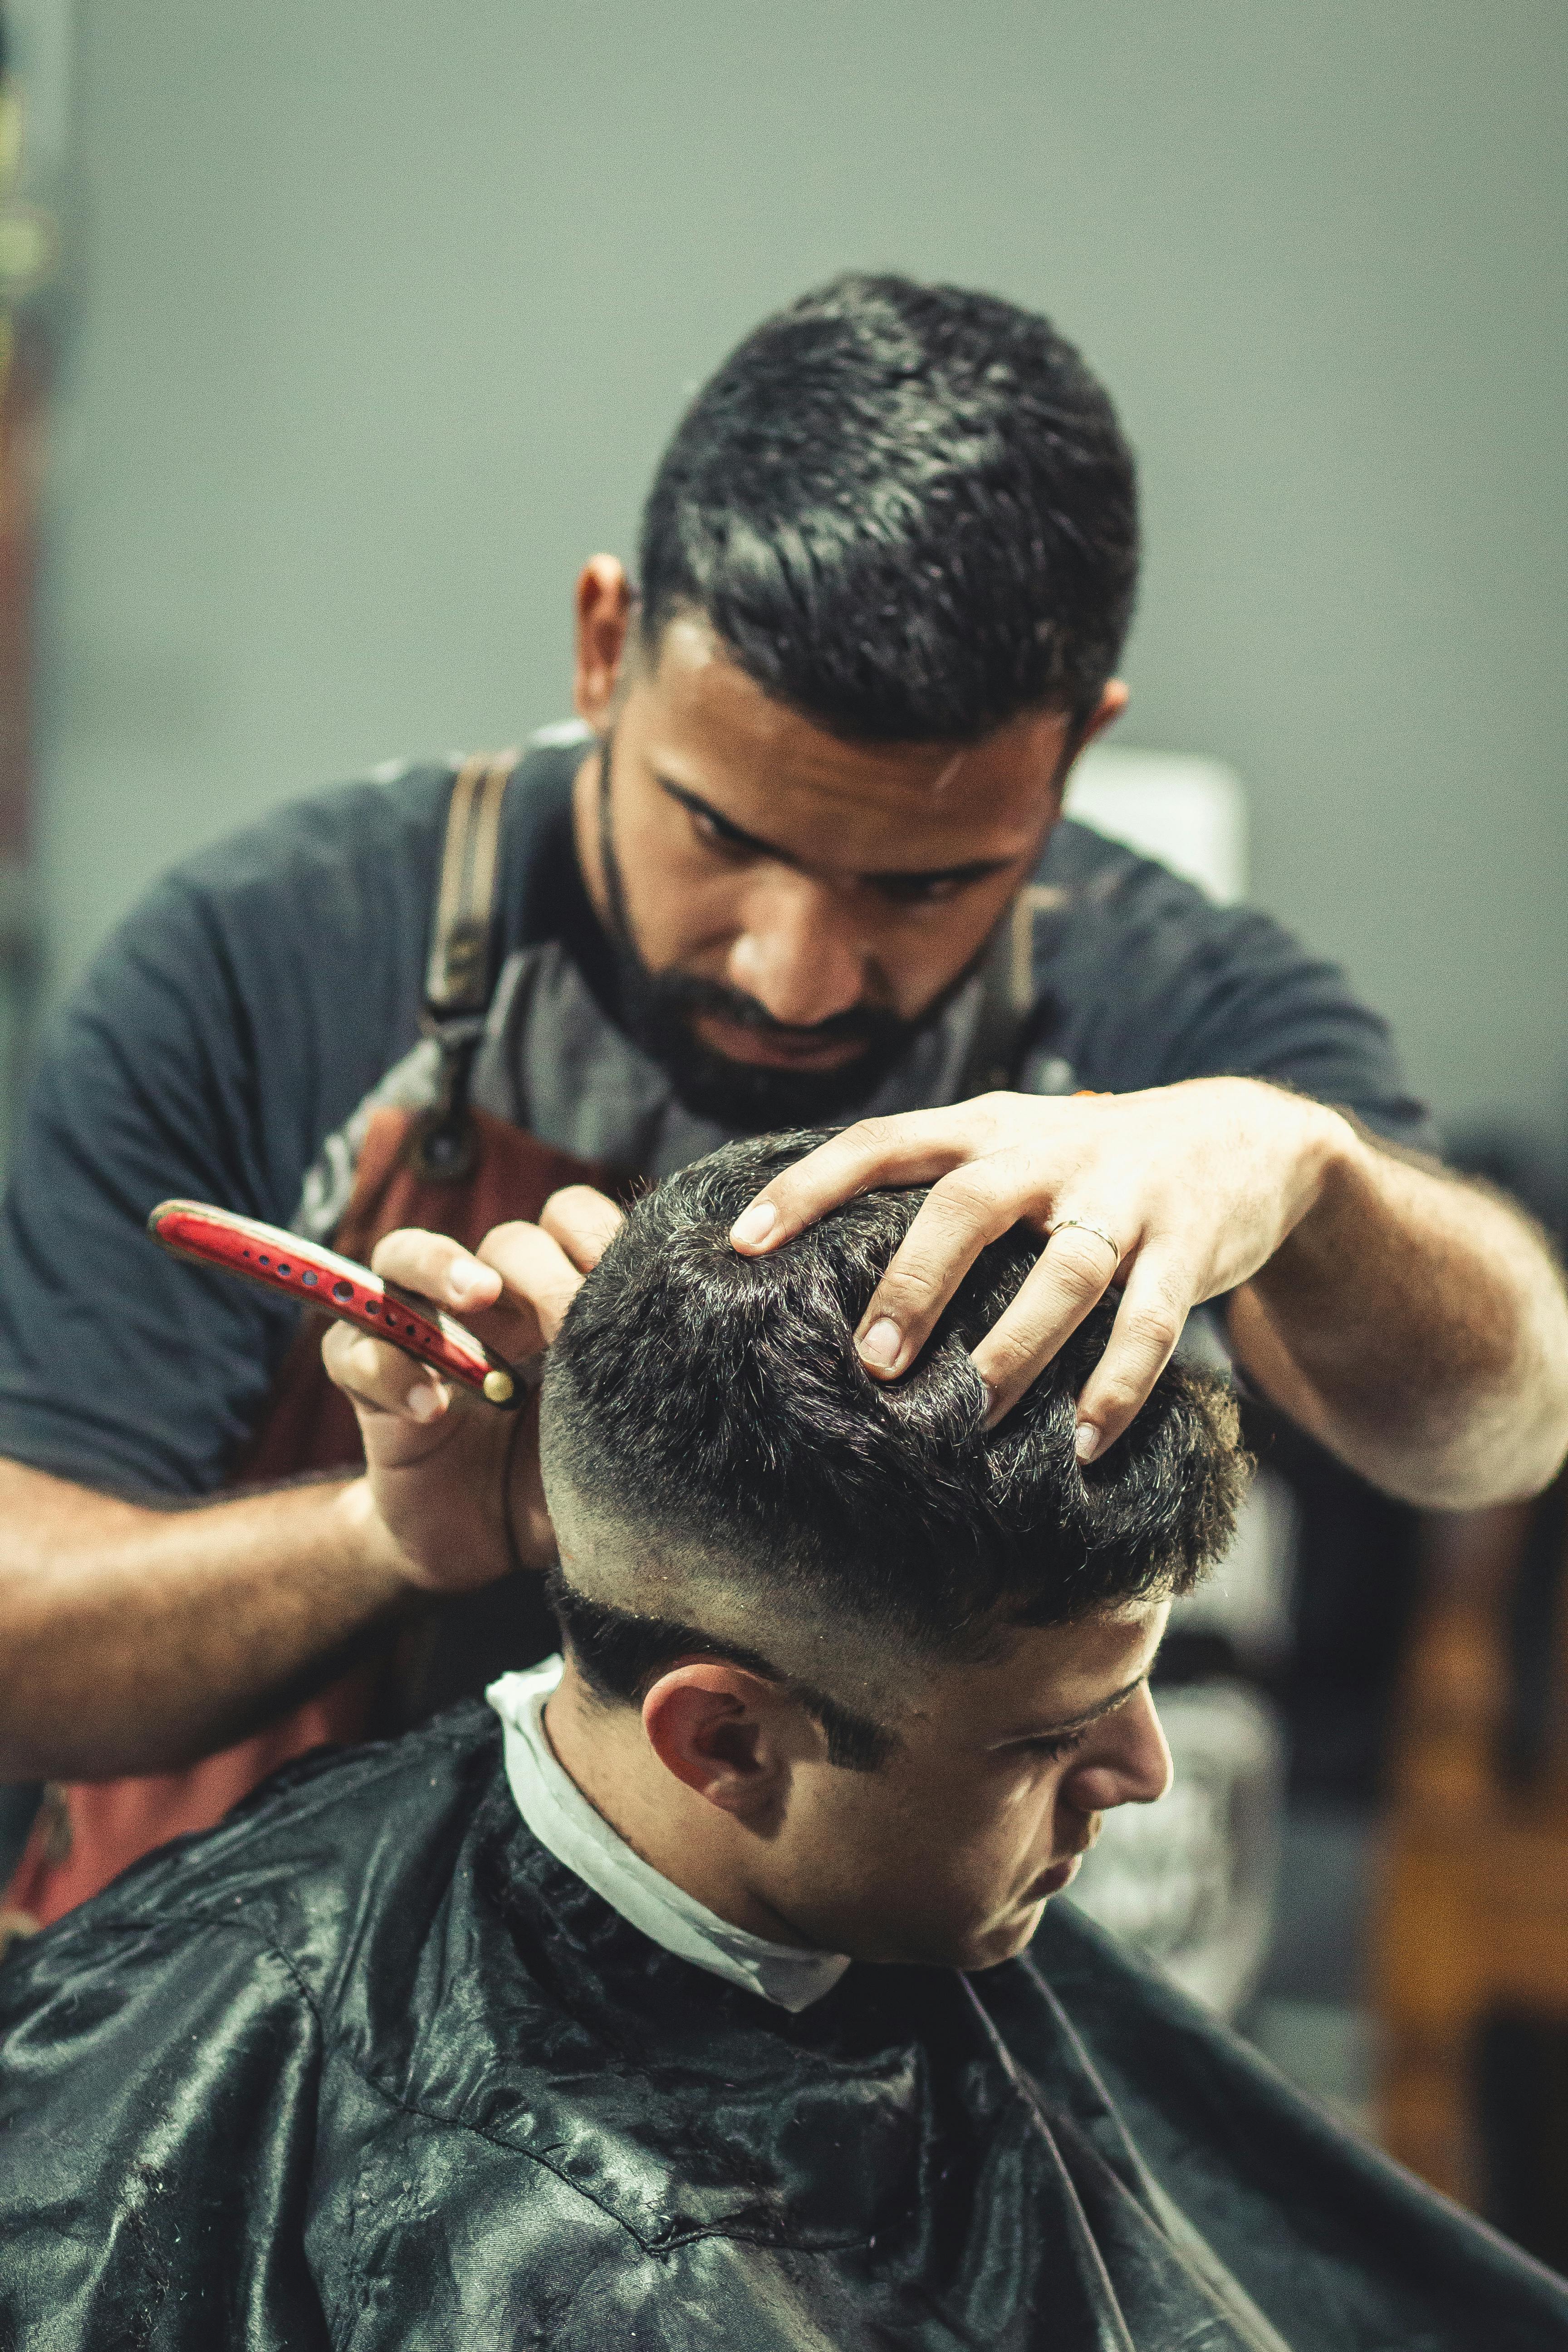 Barber Cutting Person's Hair · Free Stock Photo